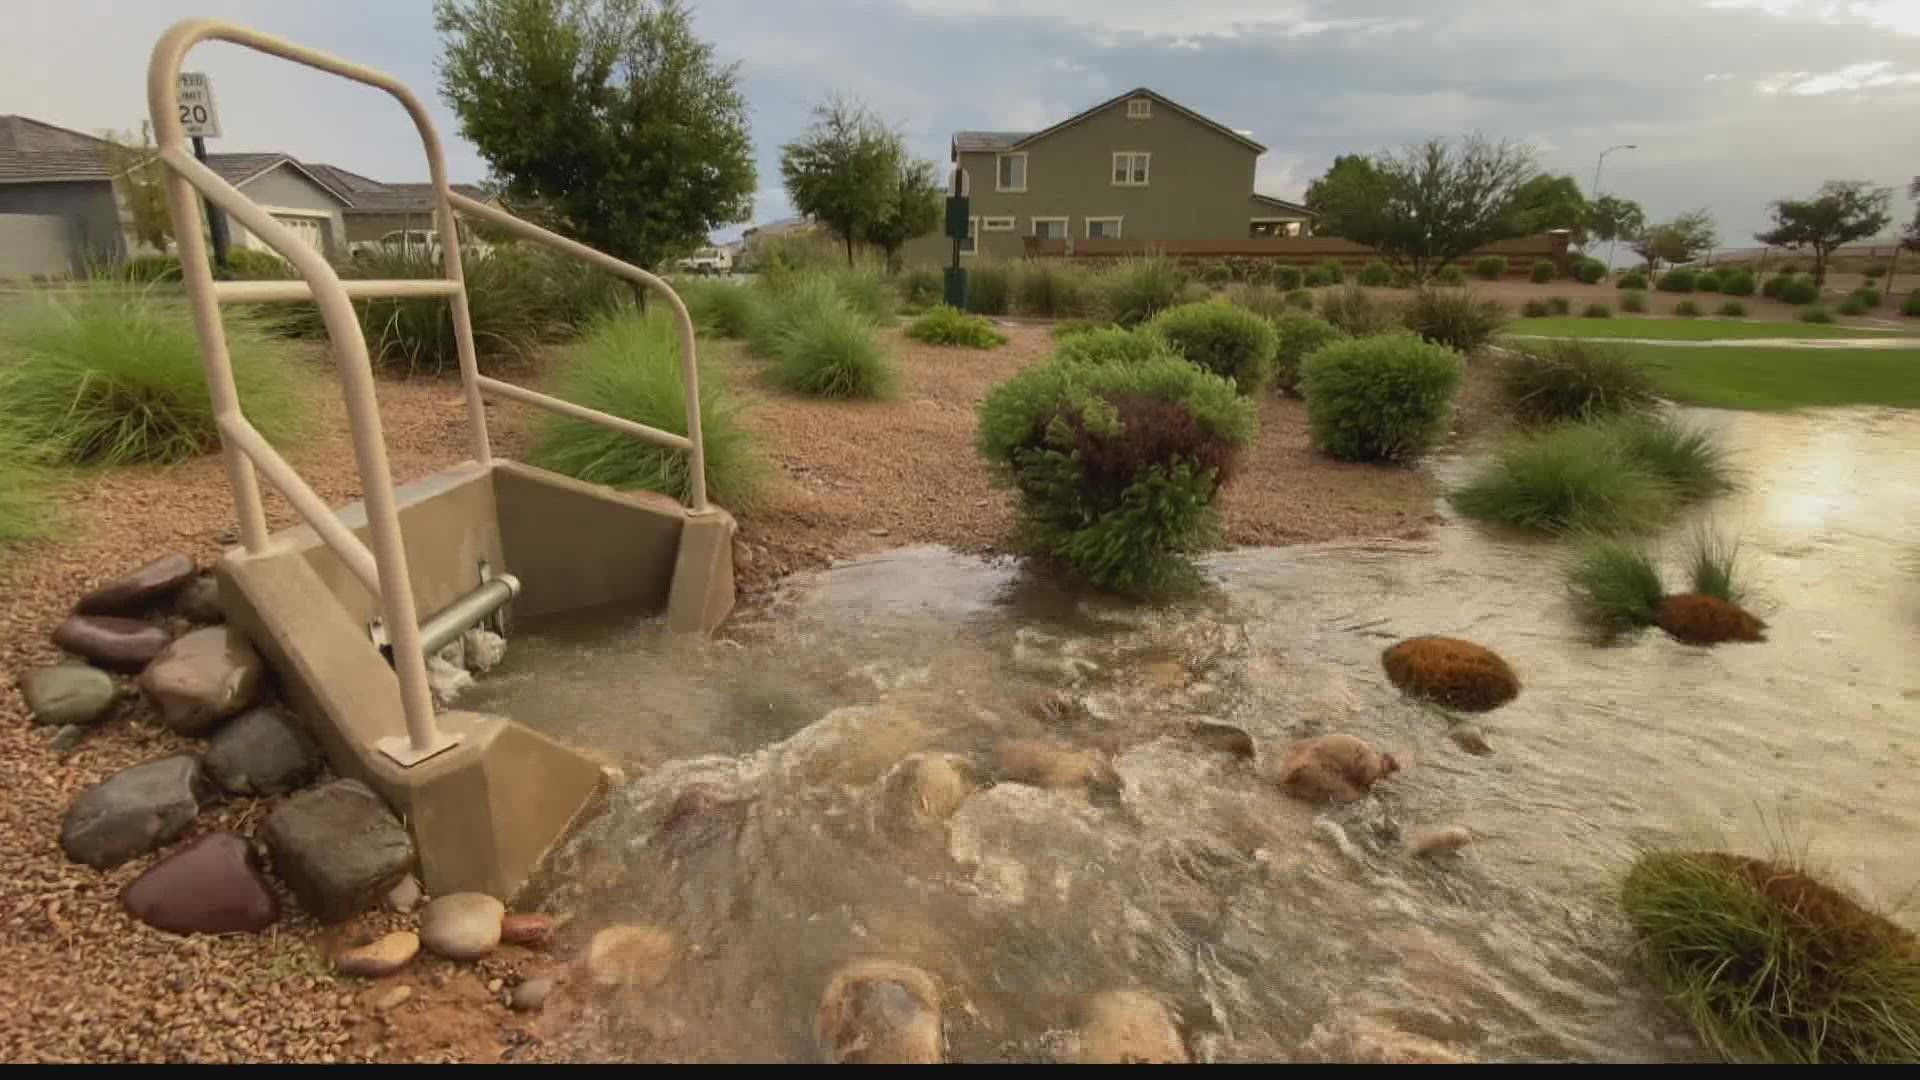 Rain is rare in the Valley of the Sun; but when it does rain, where does the water go? It ends up untreated and discharged to one of the city's outfalls.